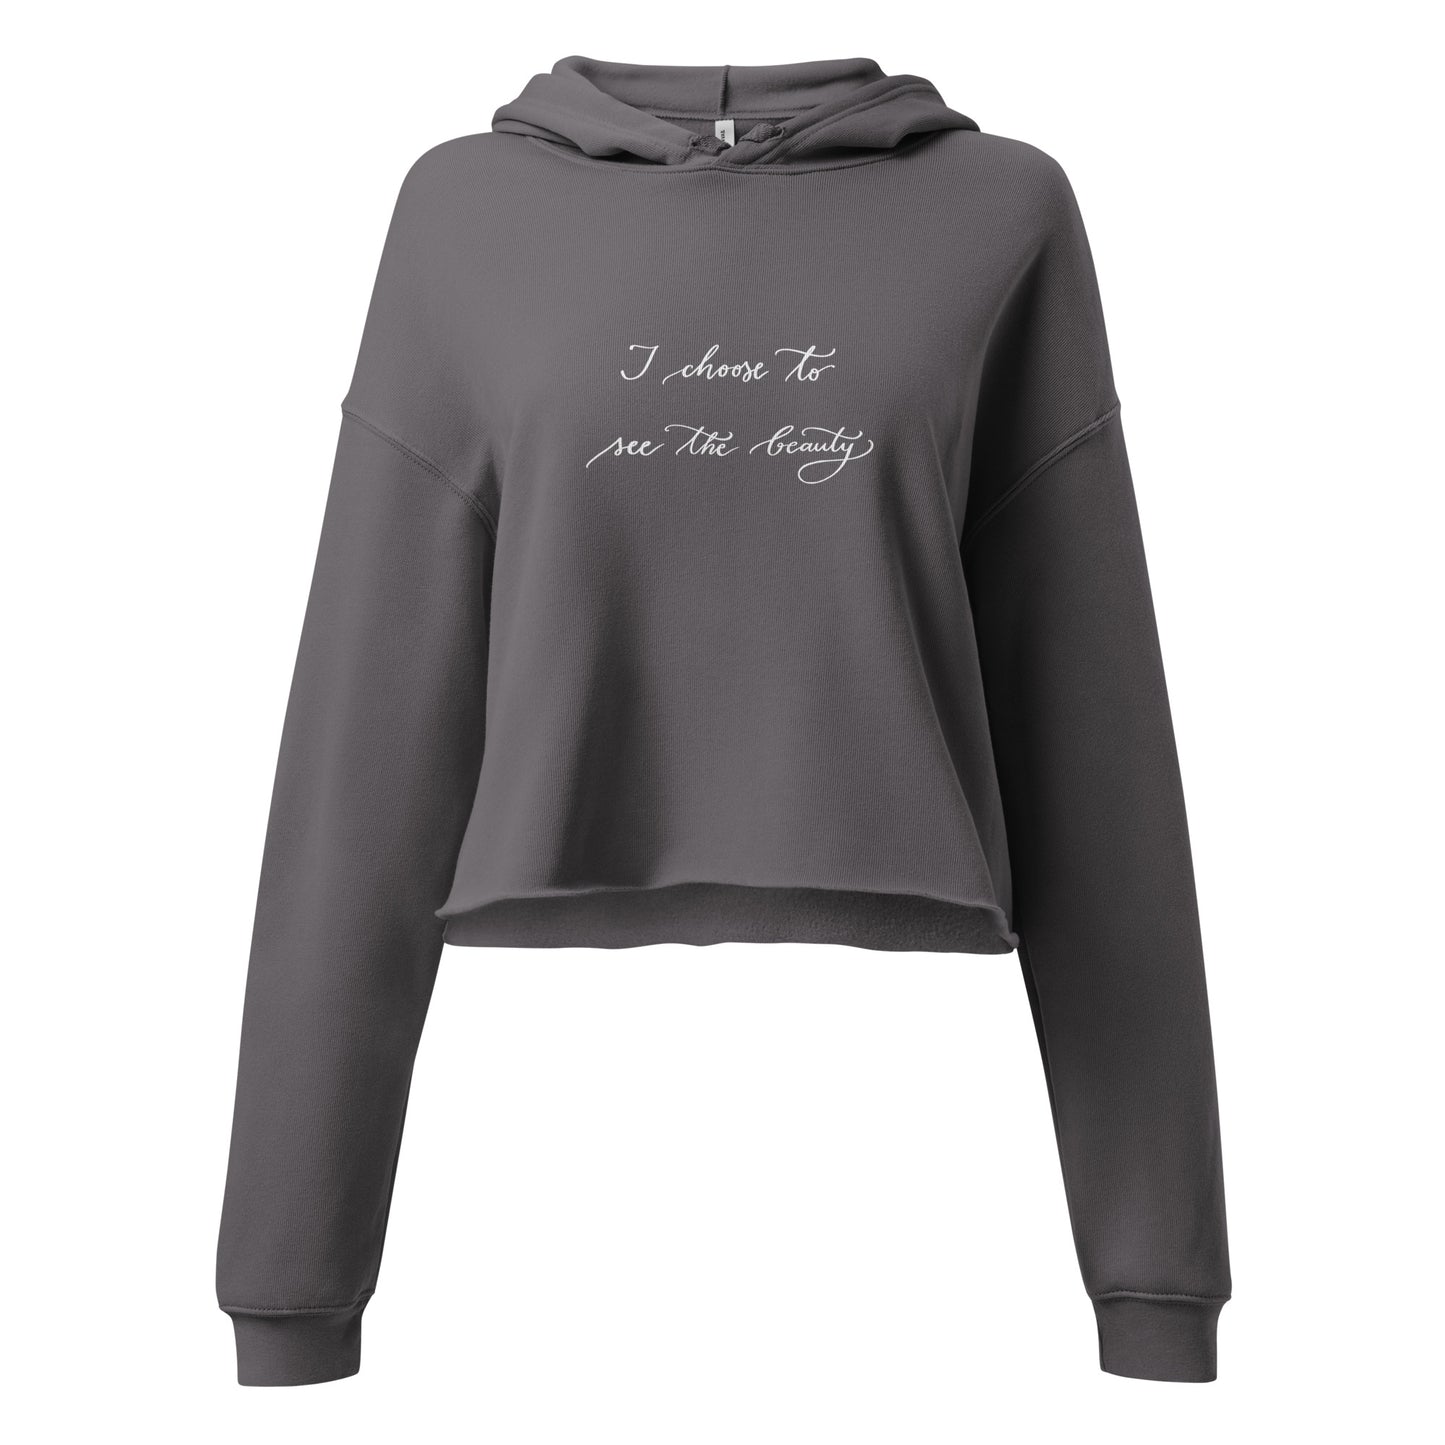 Cropped hoodie "I choose to see the beauty"